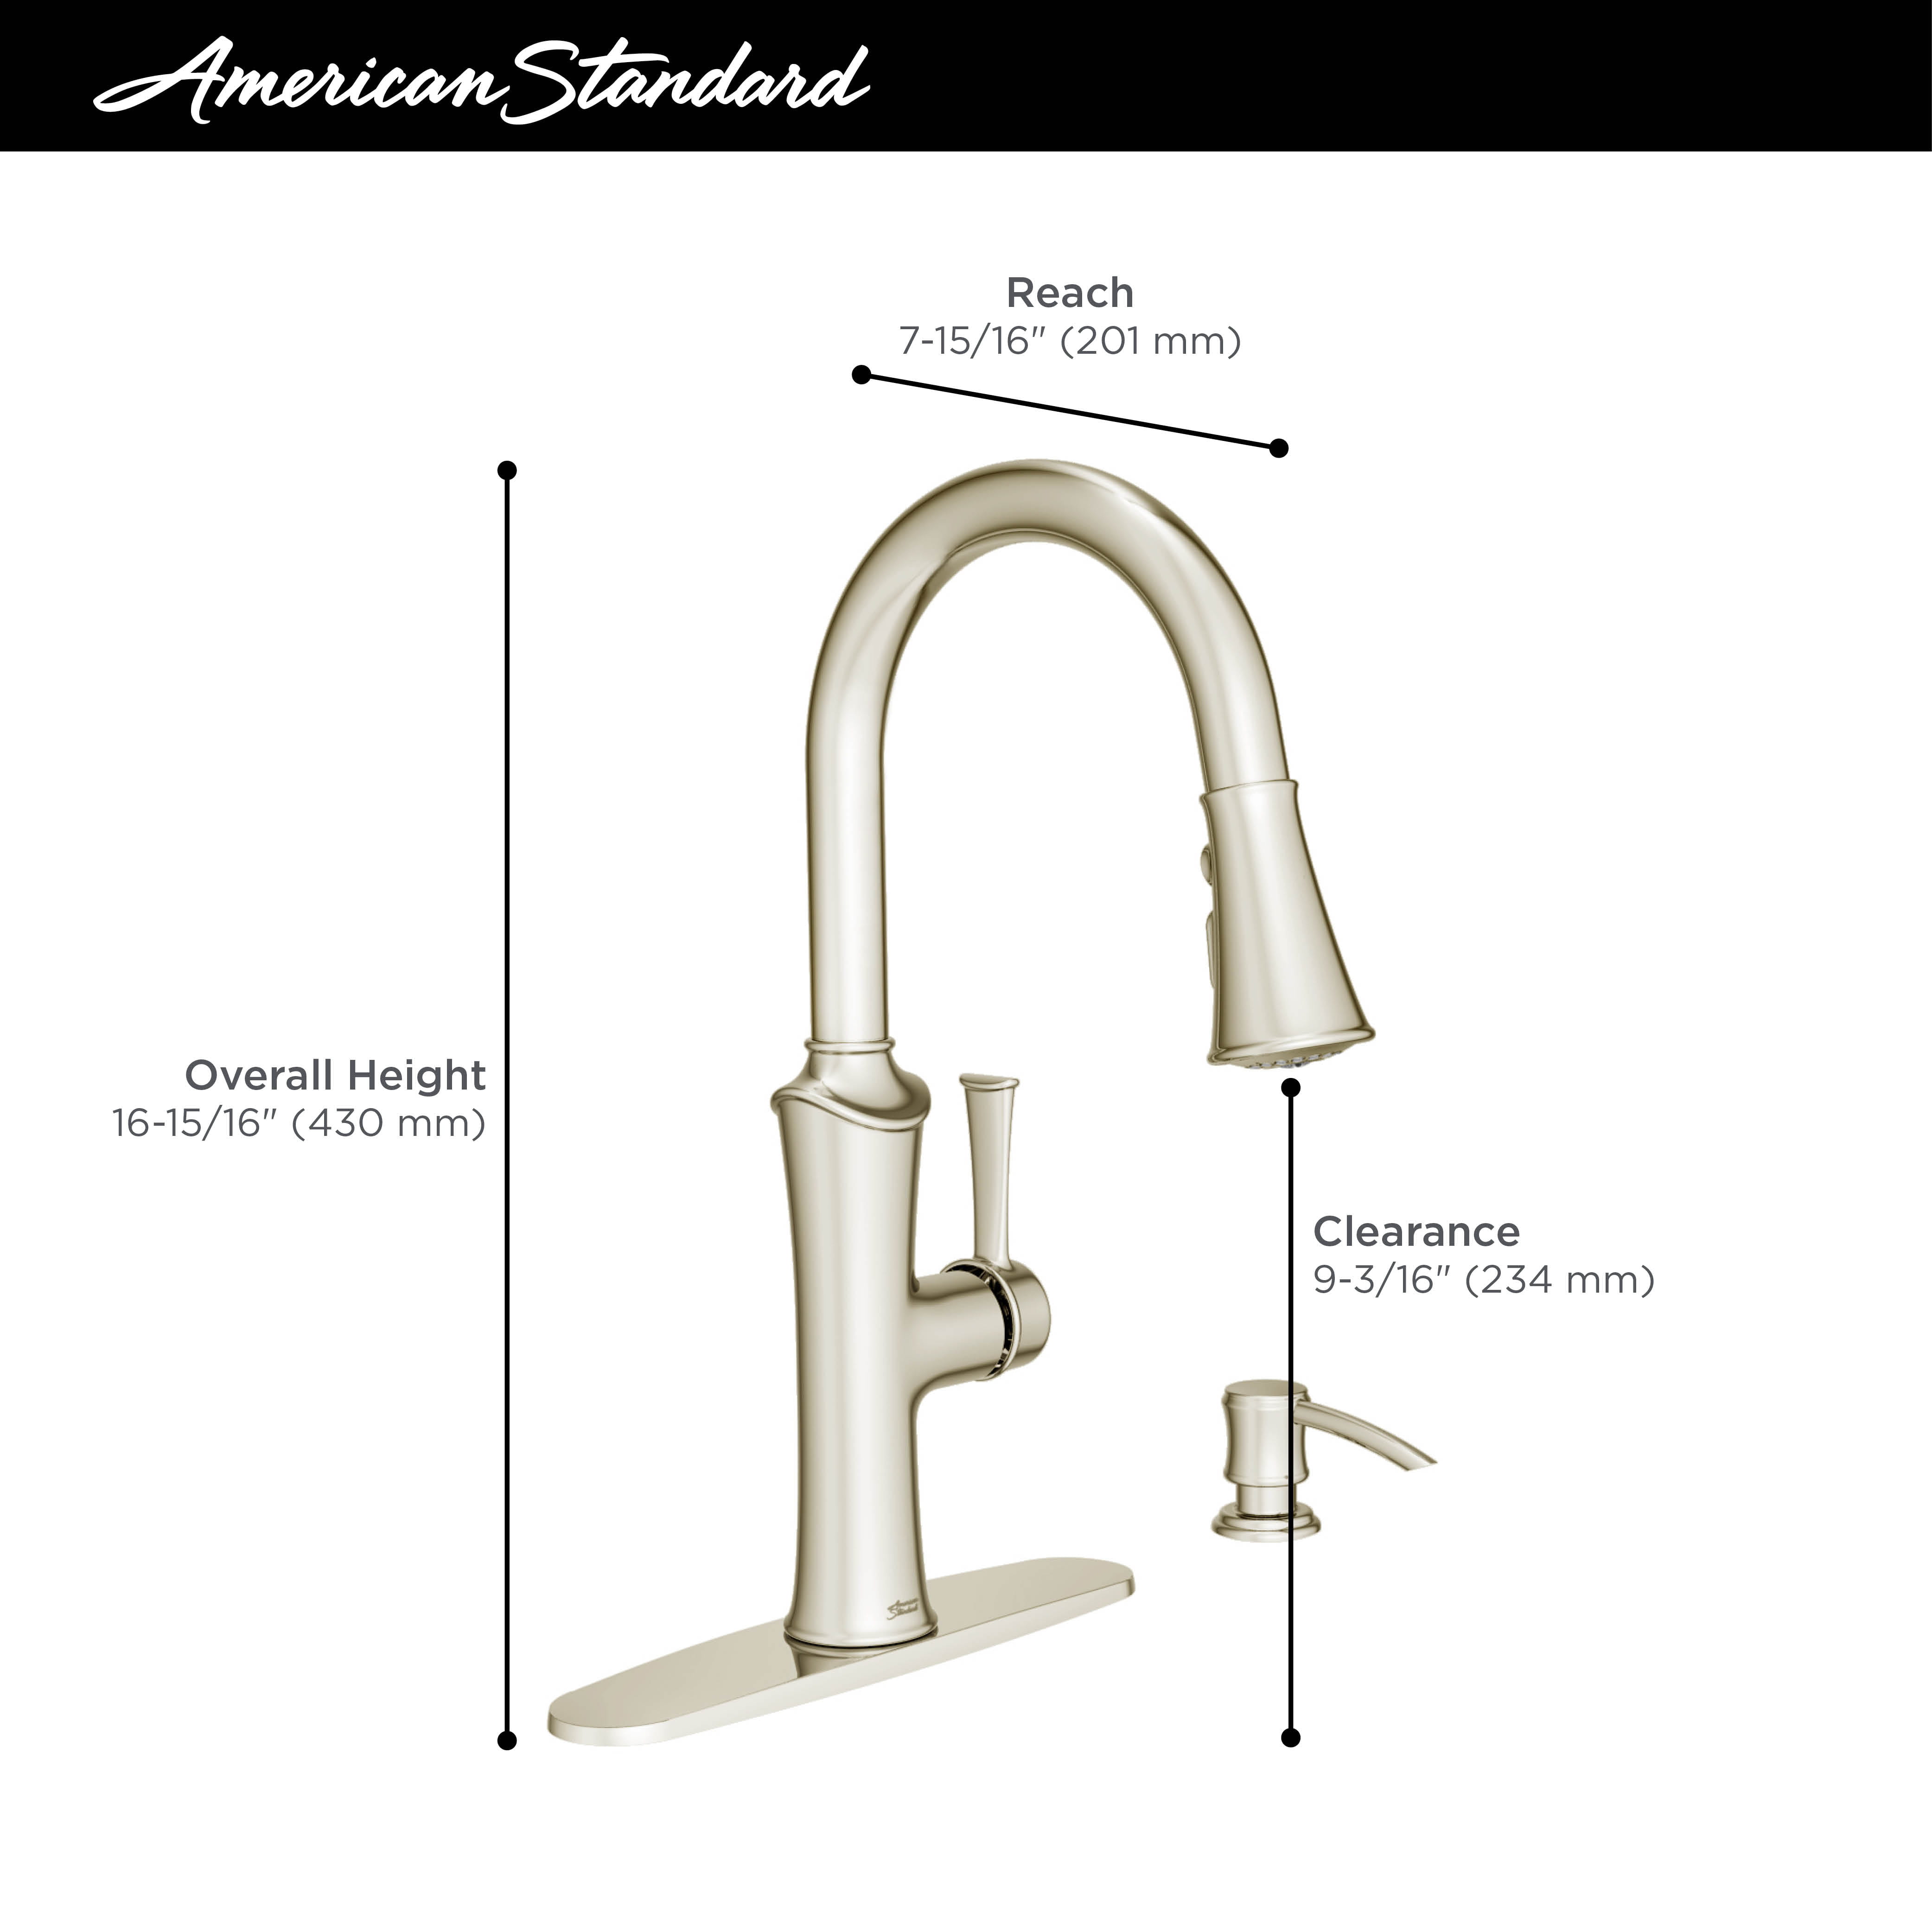 American Standard Vanek Pull-Down Kitchen Faucet with Soap Dispenser